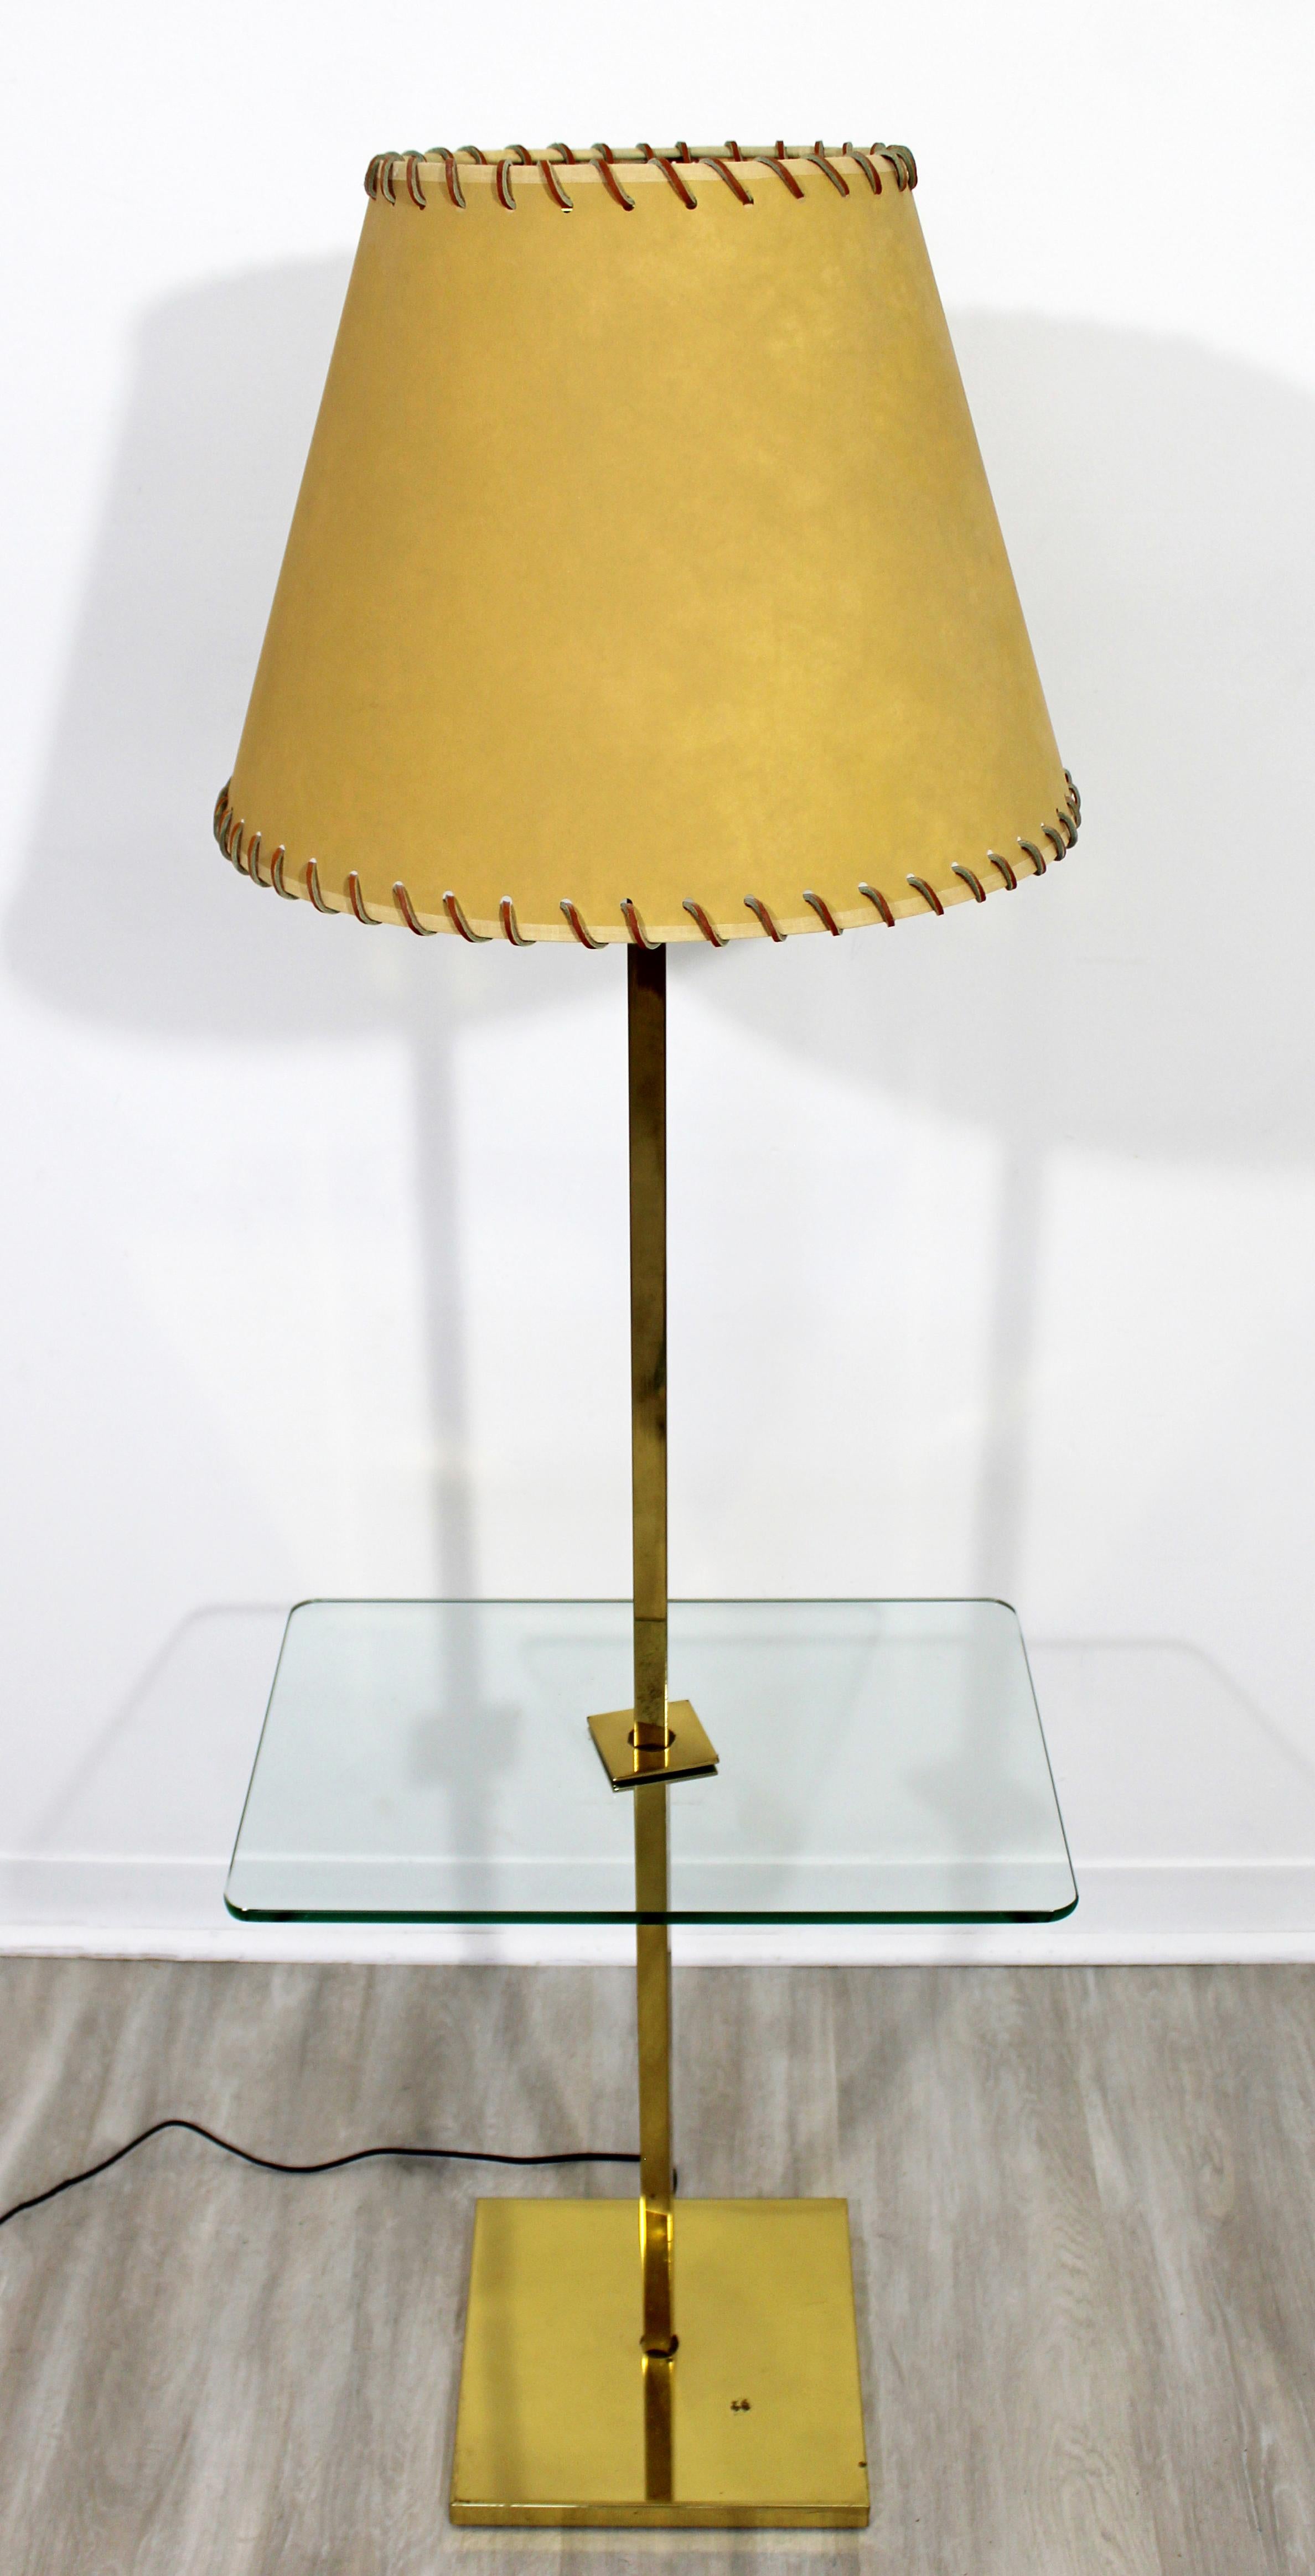 For your consideration is a gorgeous, brass floor lamp, with a rectangular glass table attached, and the original shade, by Laurel Lamp Co, circa 1960s. In good vintage condition. The dimensions are 18